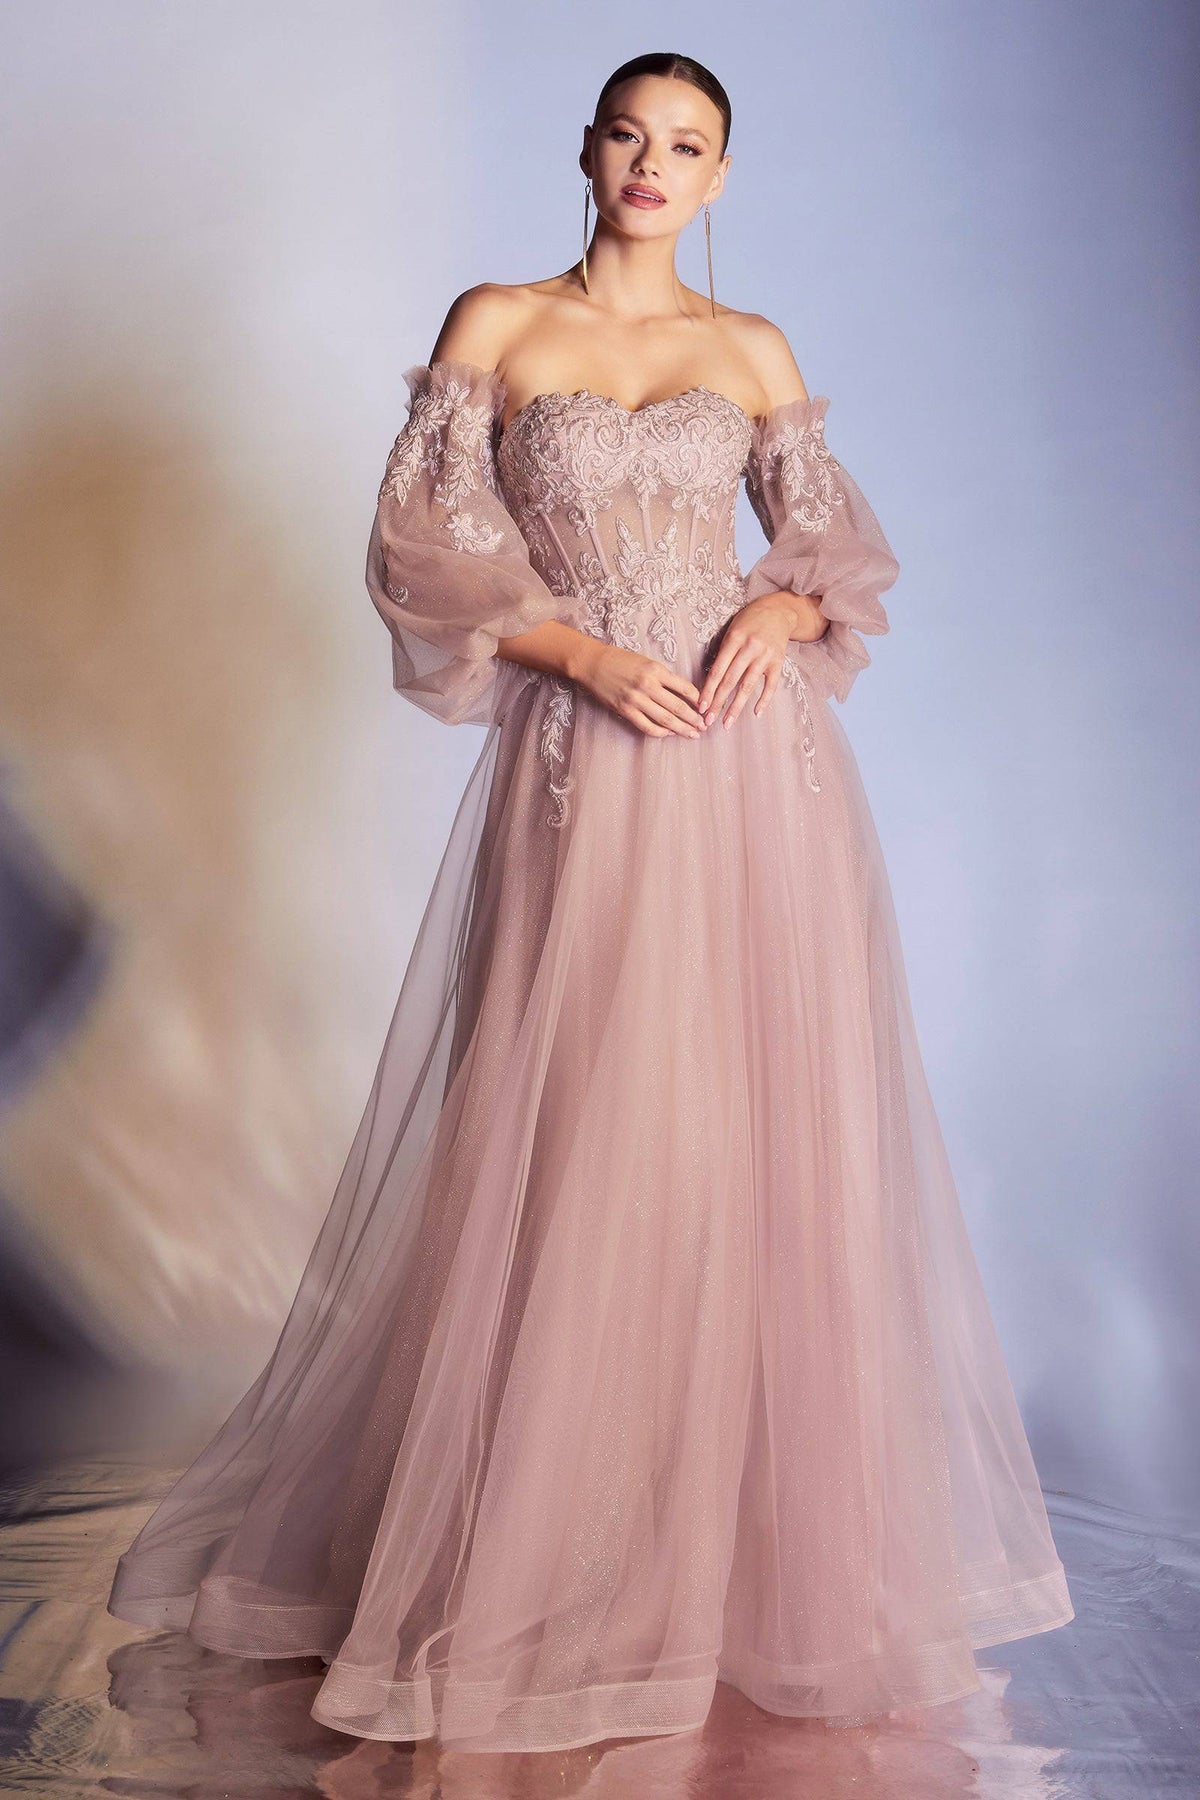 Opulent Off Shoulder Embroidered Gown with Puffy Sleeves and Long Skirt #CDCD948 - NORMA REED